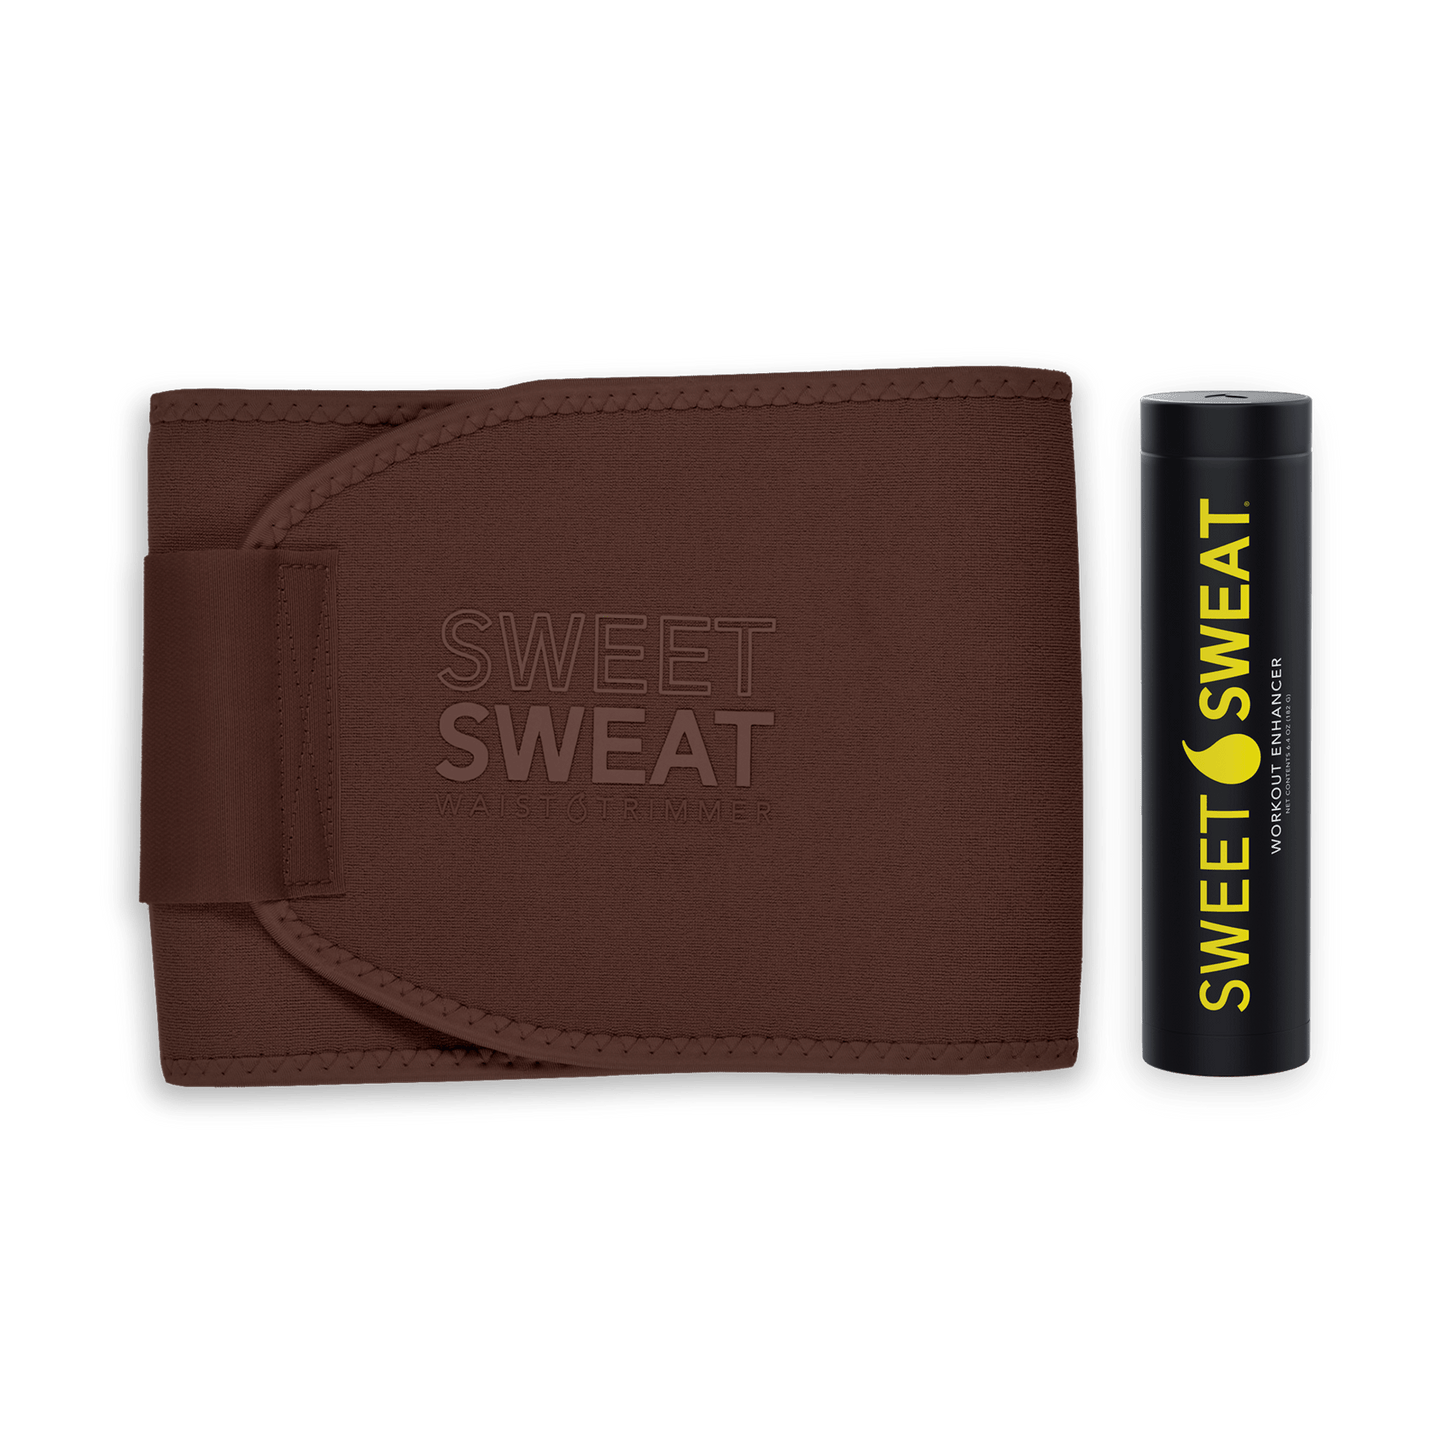 a Sweet Sweat® Toned Bundle with Trimmer and Sweet Sweat® Stick wallet with a bottle and a tampon.